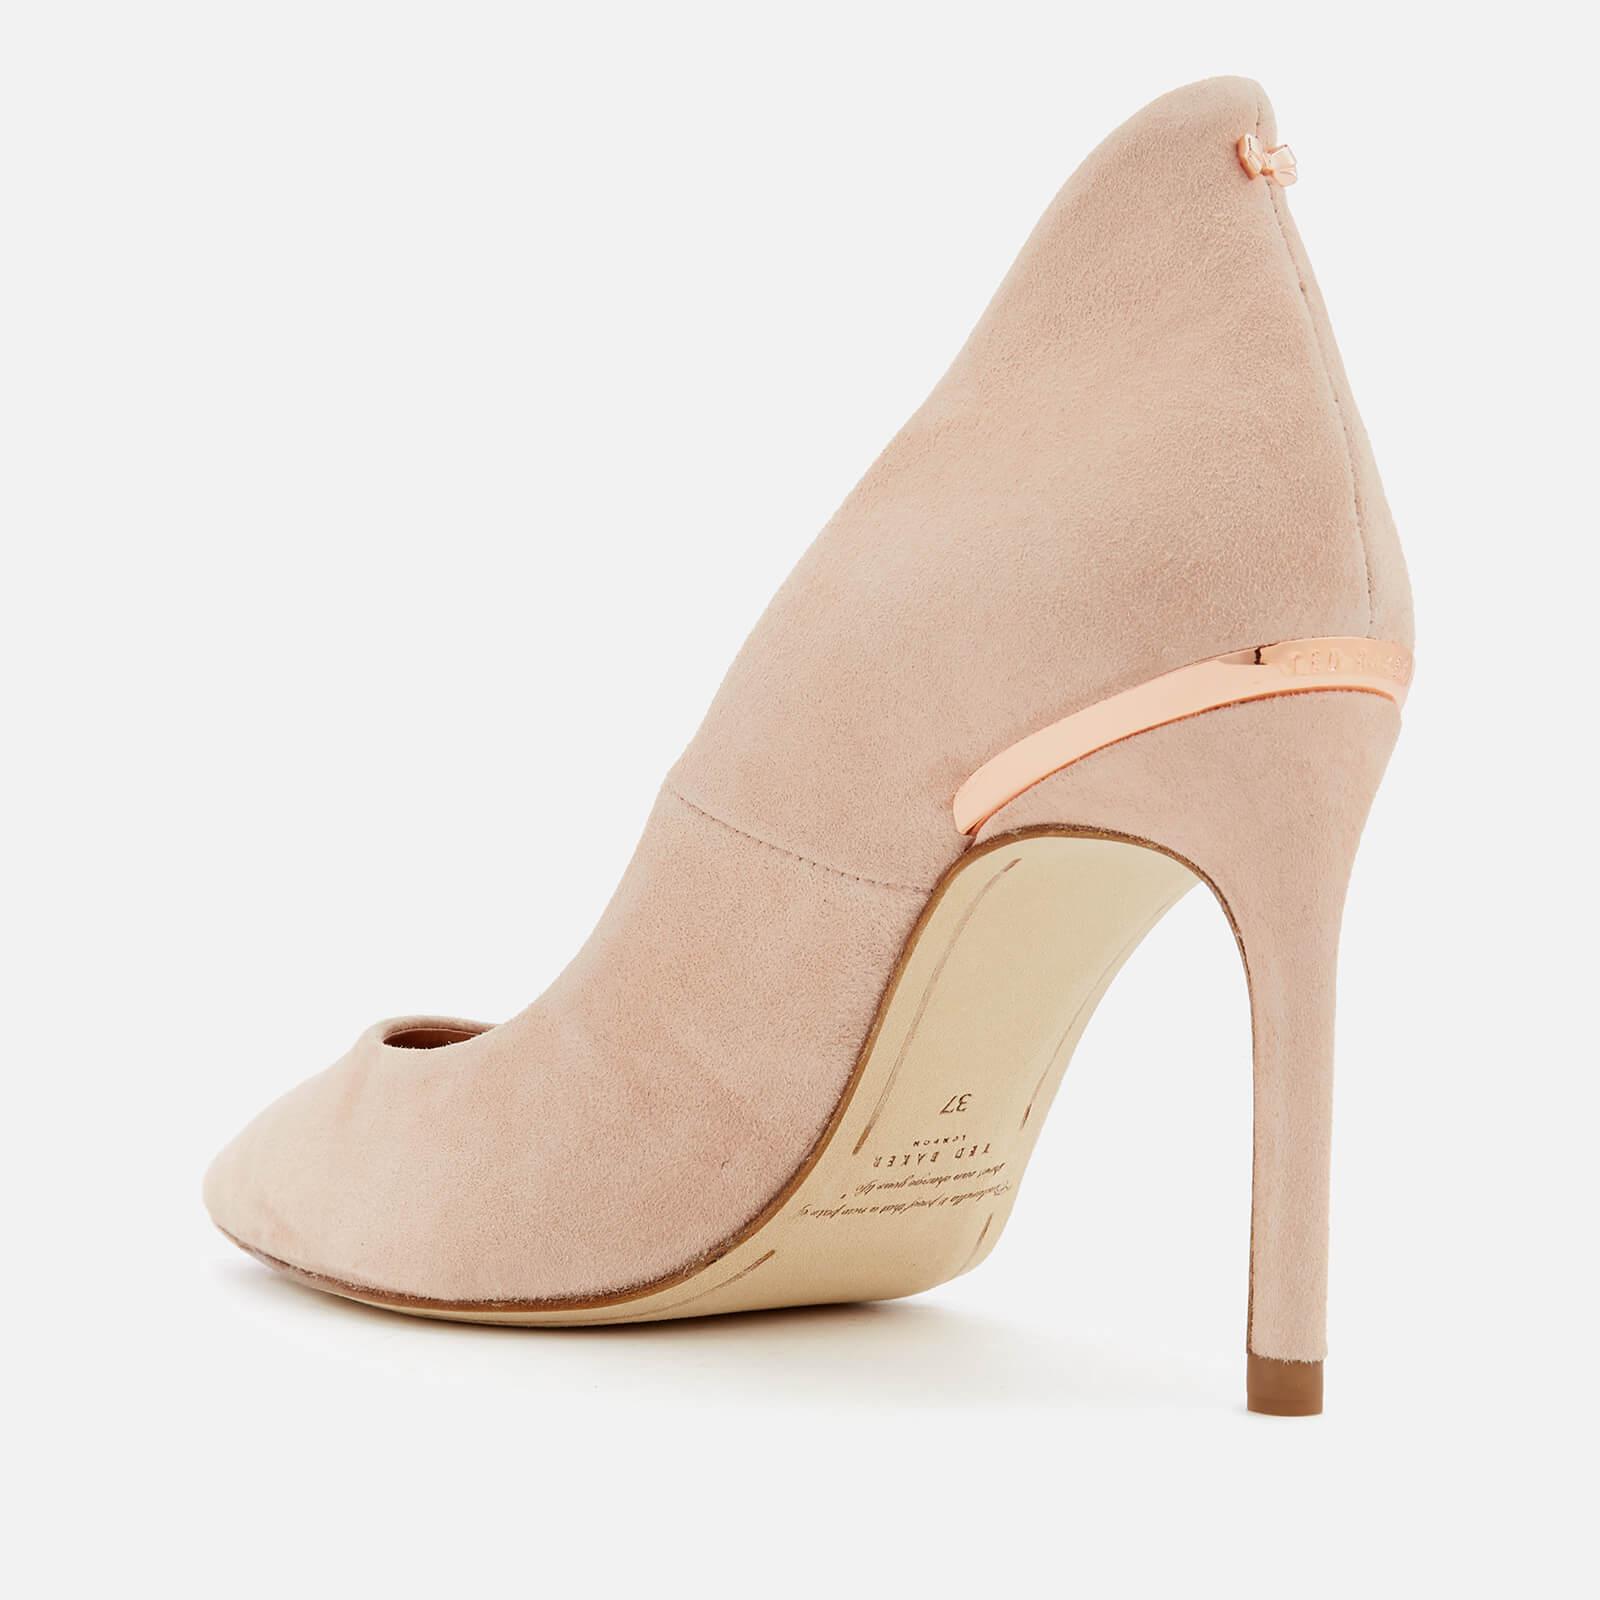 Ted Baker Savio 2 Suede Court Shoes in Pink - Lyst